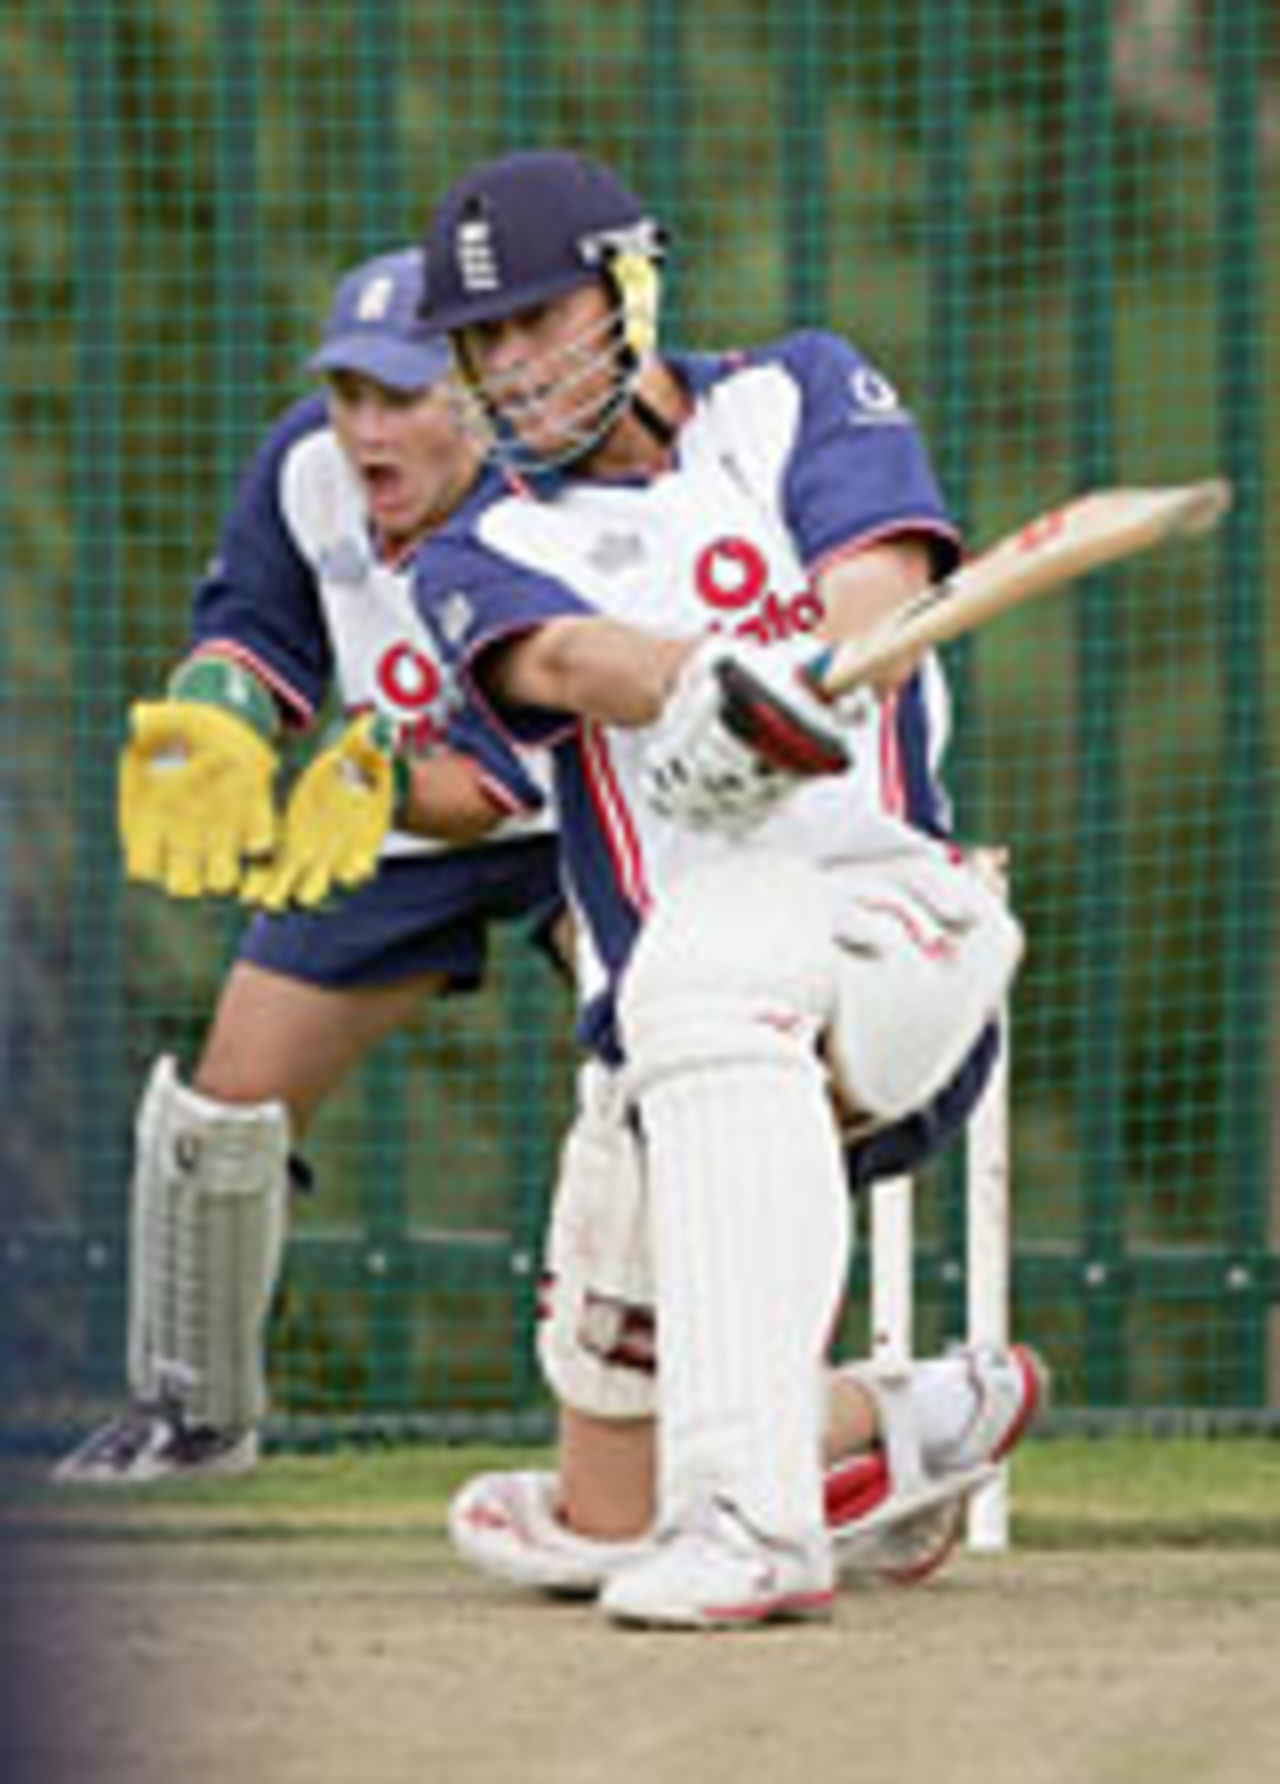 Andrew Flintoff on one knee in the nets at the Wanderers, Johannesburg, January 10 2005